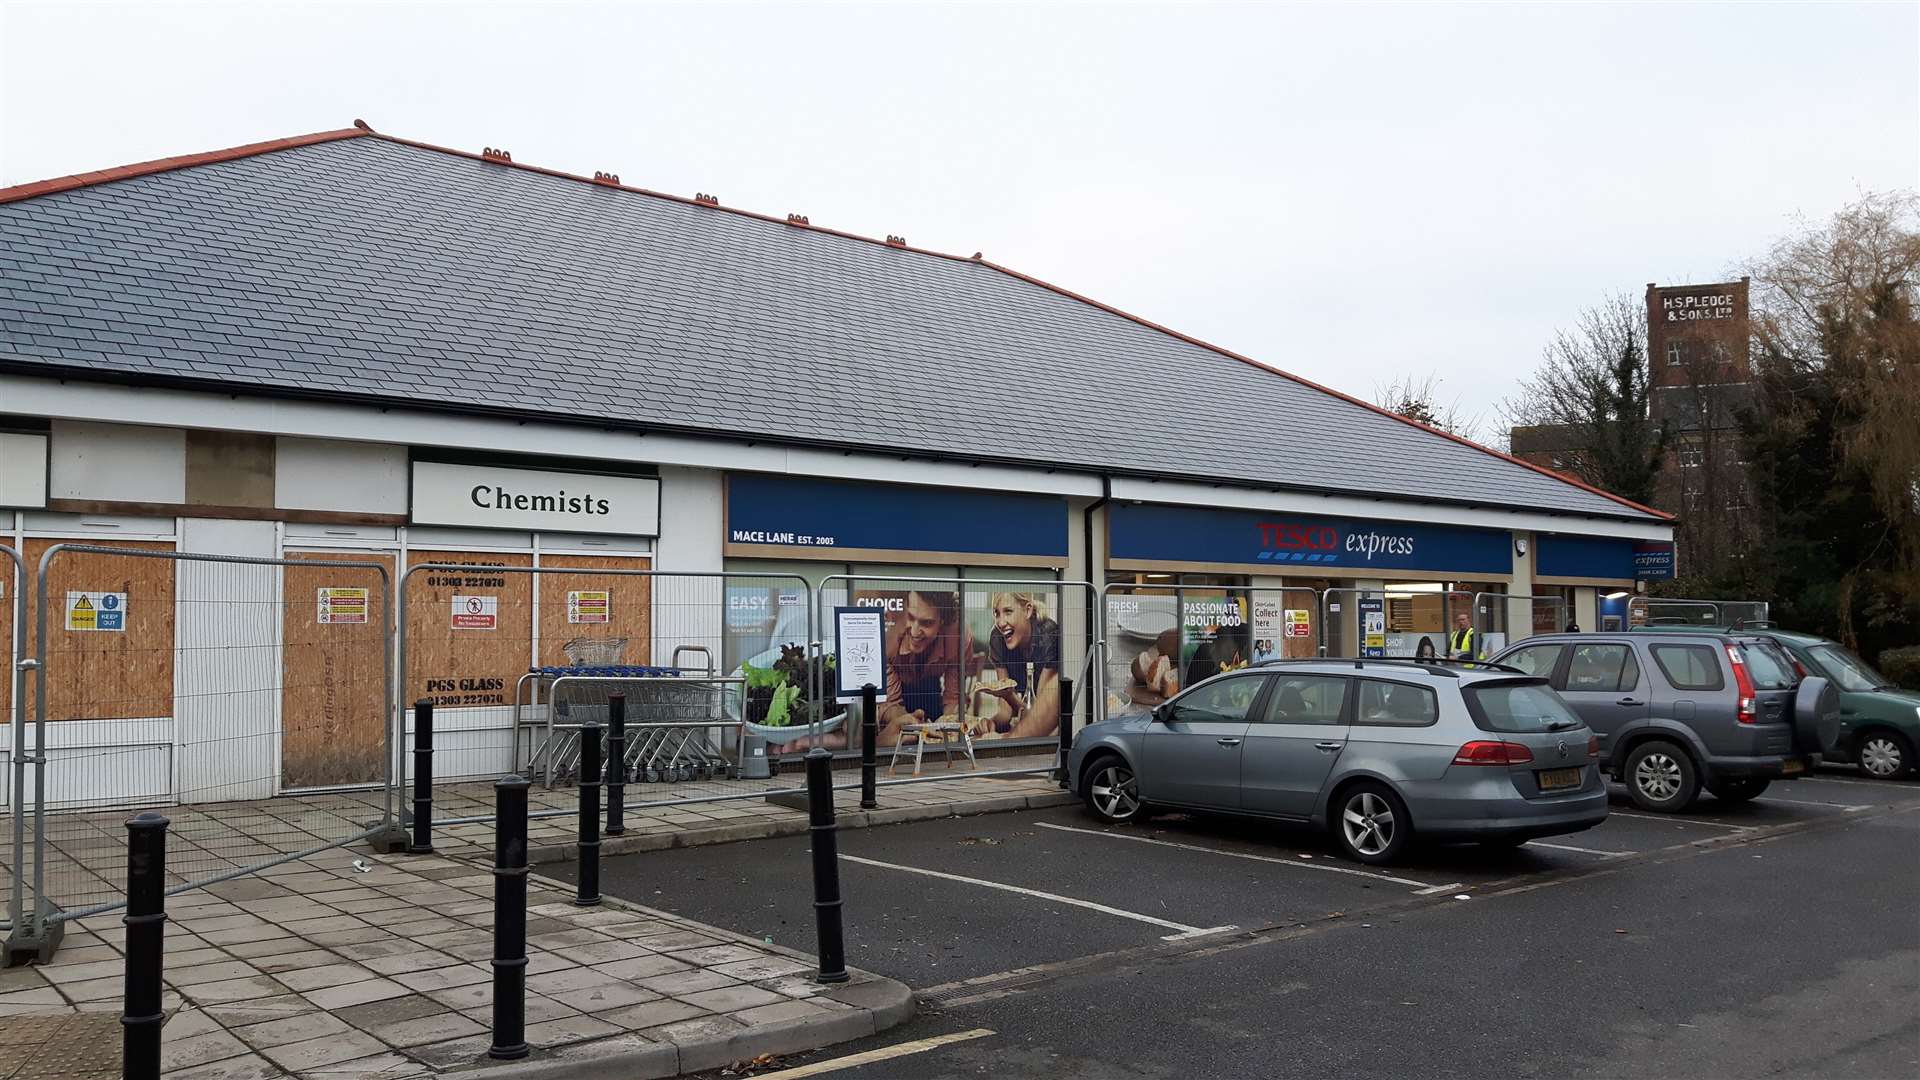 The revamped Tesco Express store is set to re-open